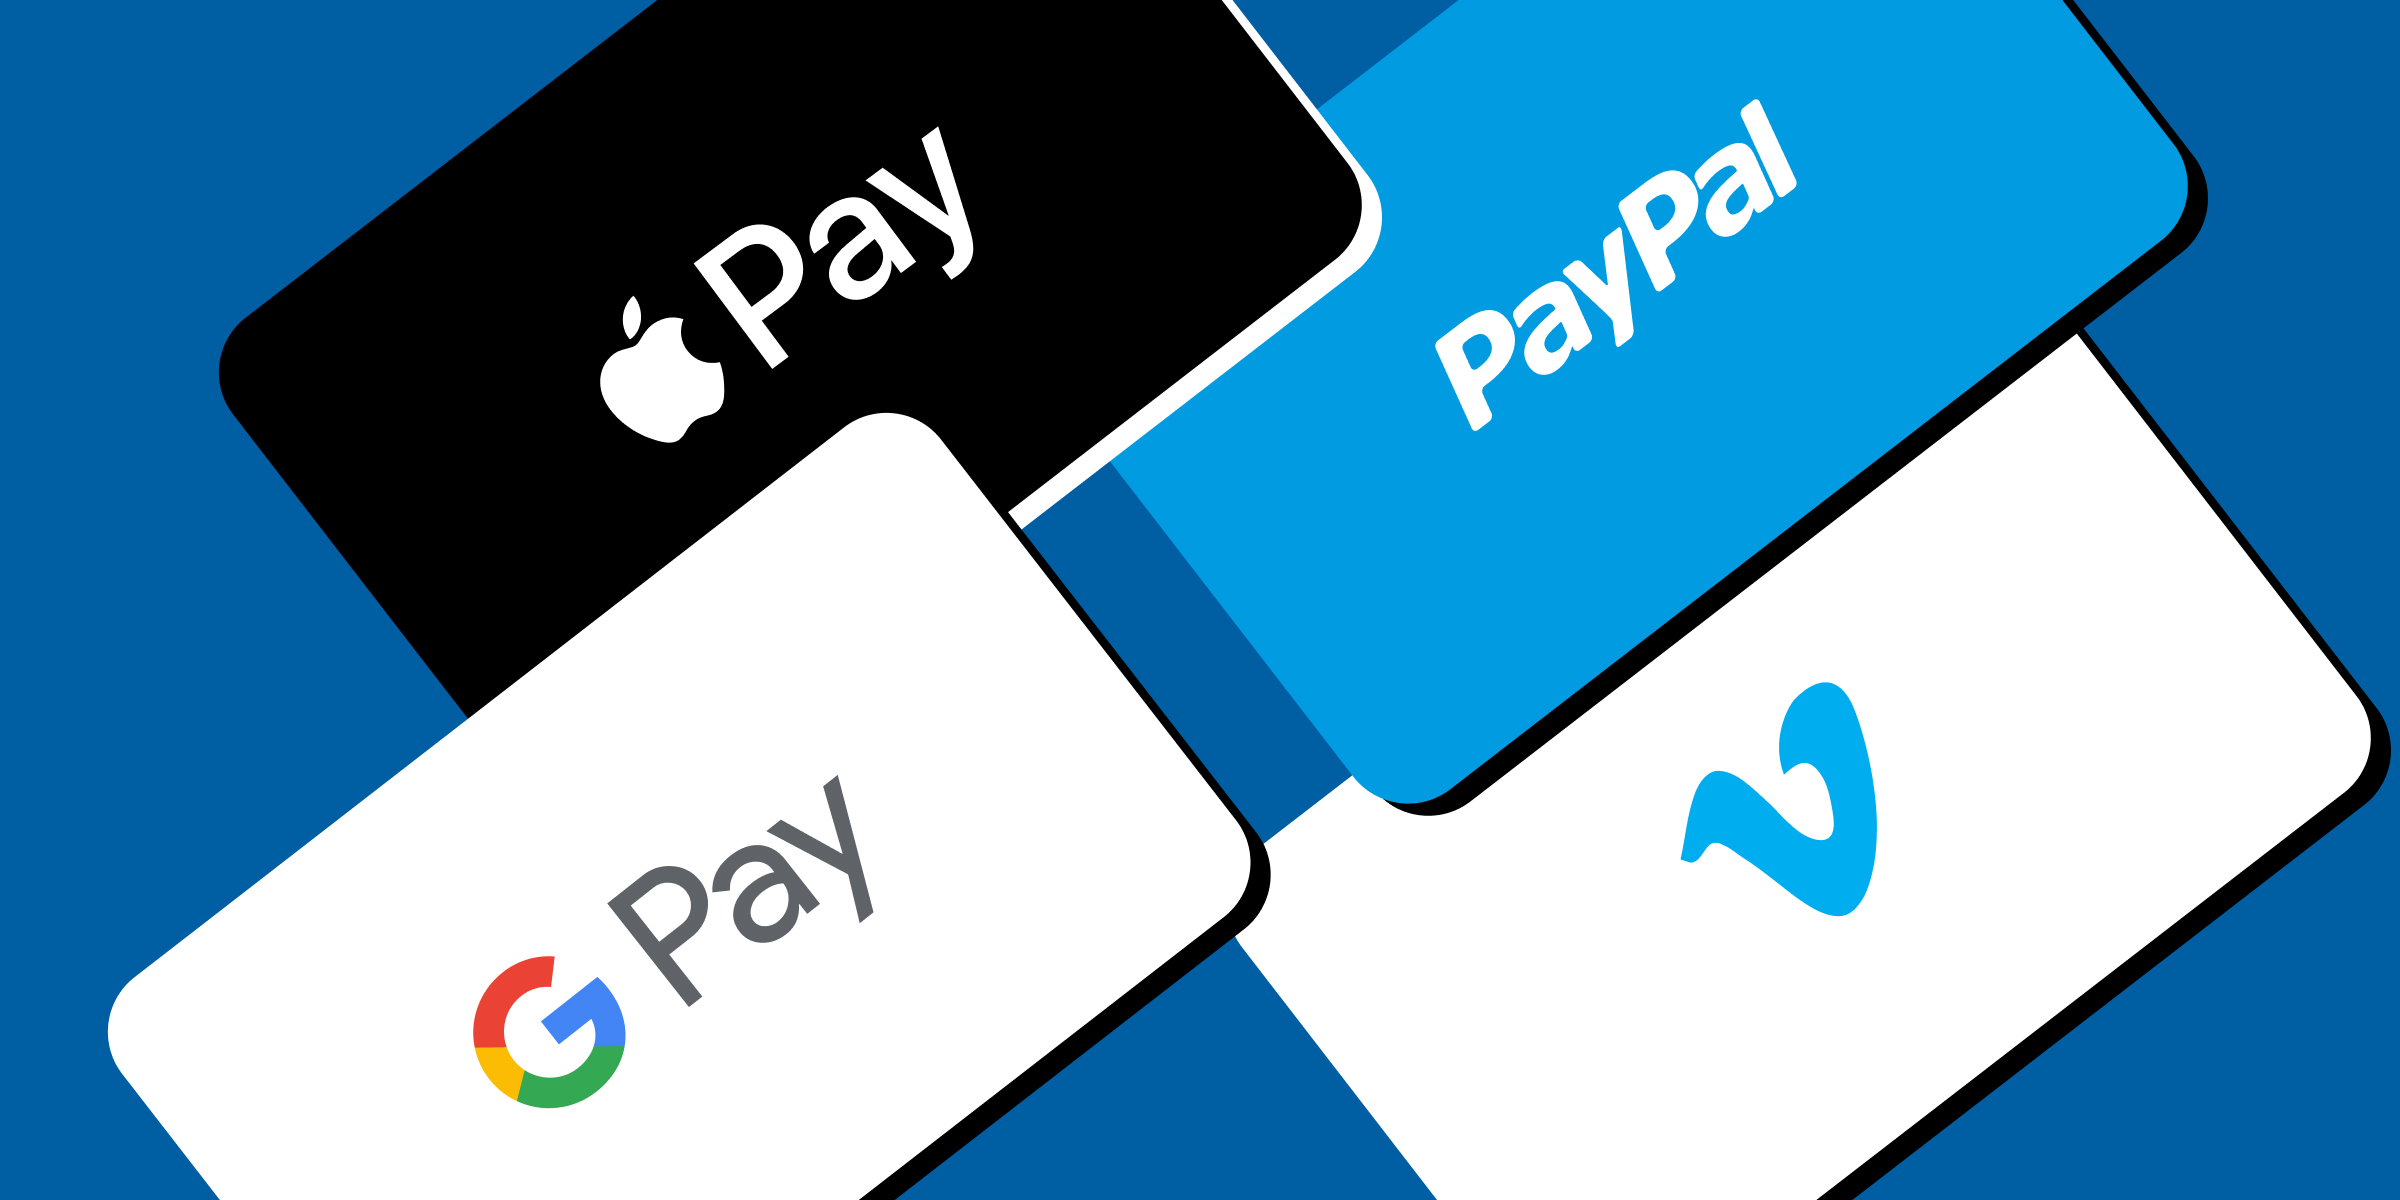 Shot of Digital Wallet cards including apple pay, google pay, PayPal, and Venmo.